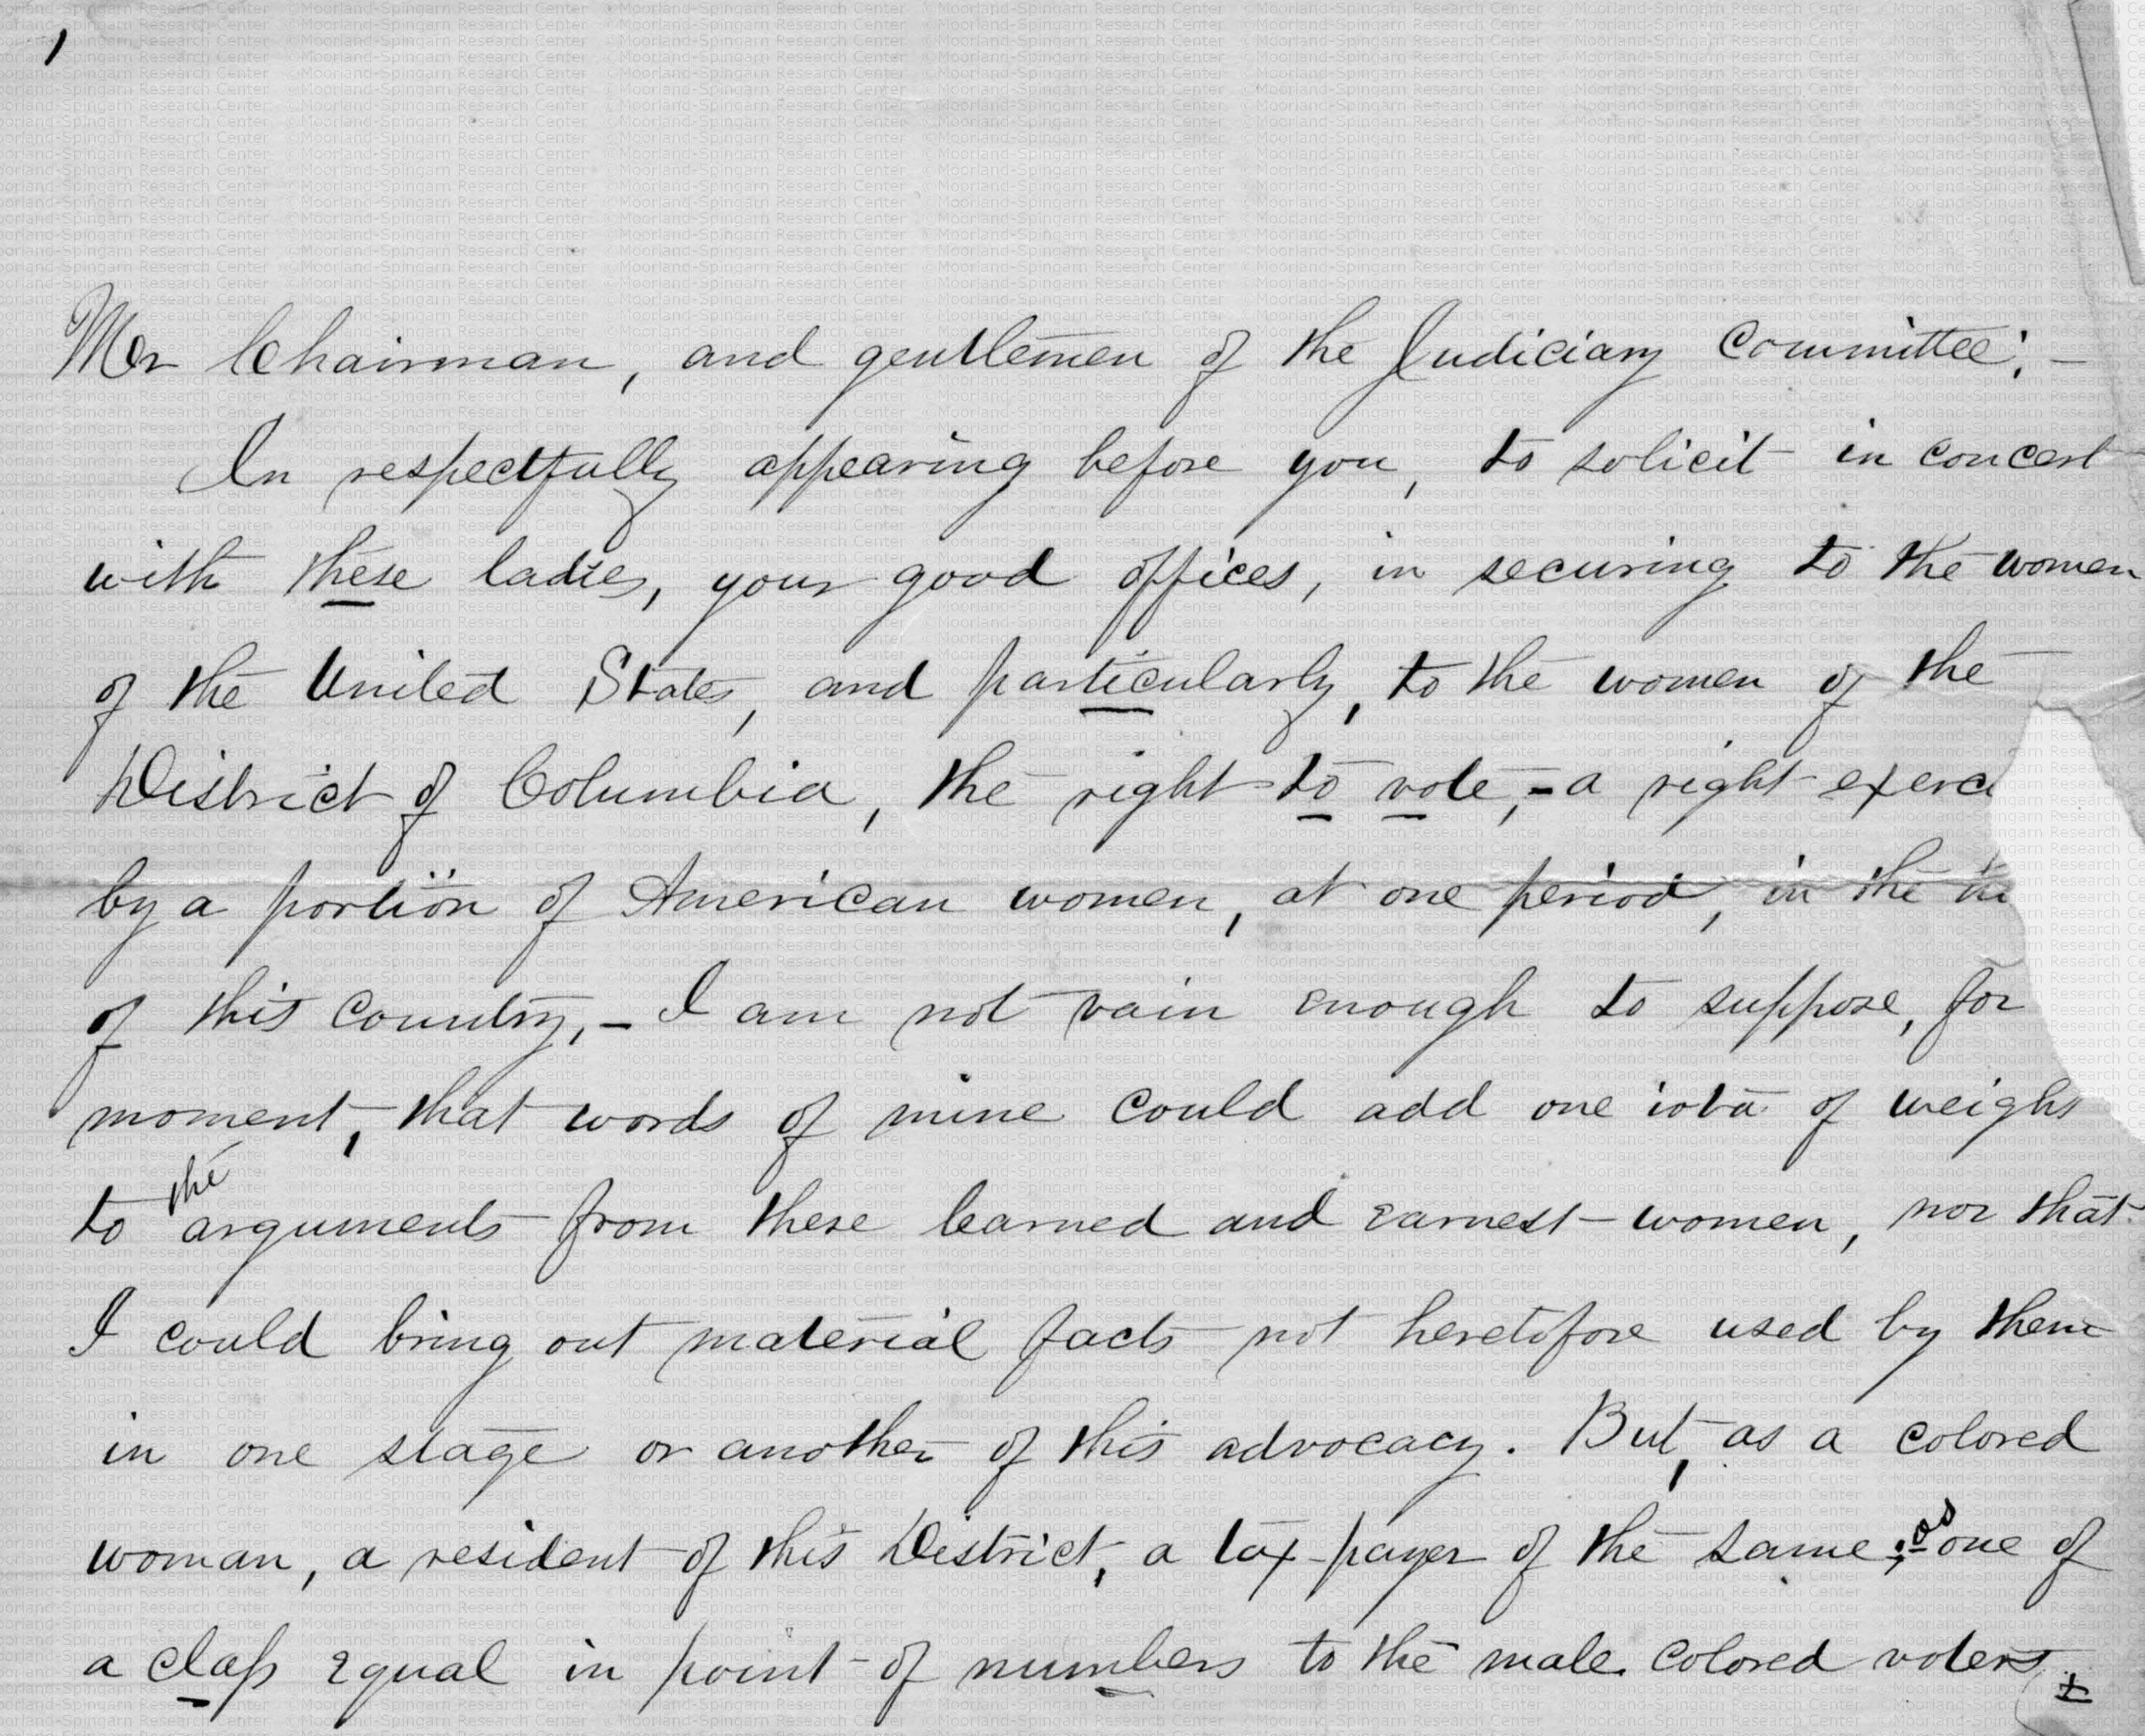 The first page of the speech is hand written in neatly cursive writing. The slightly yellowed paper is worn and torn.